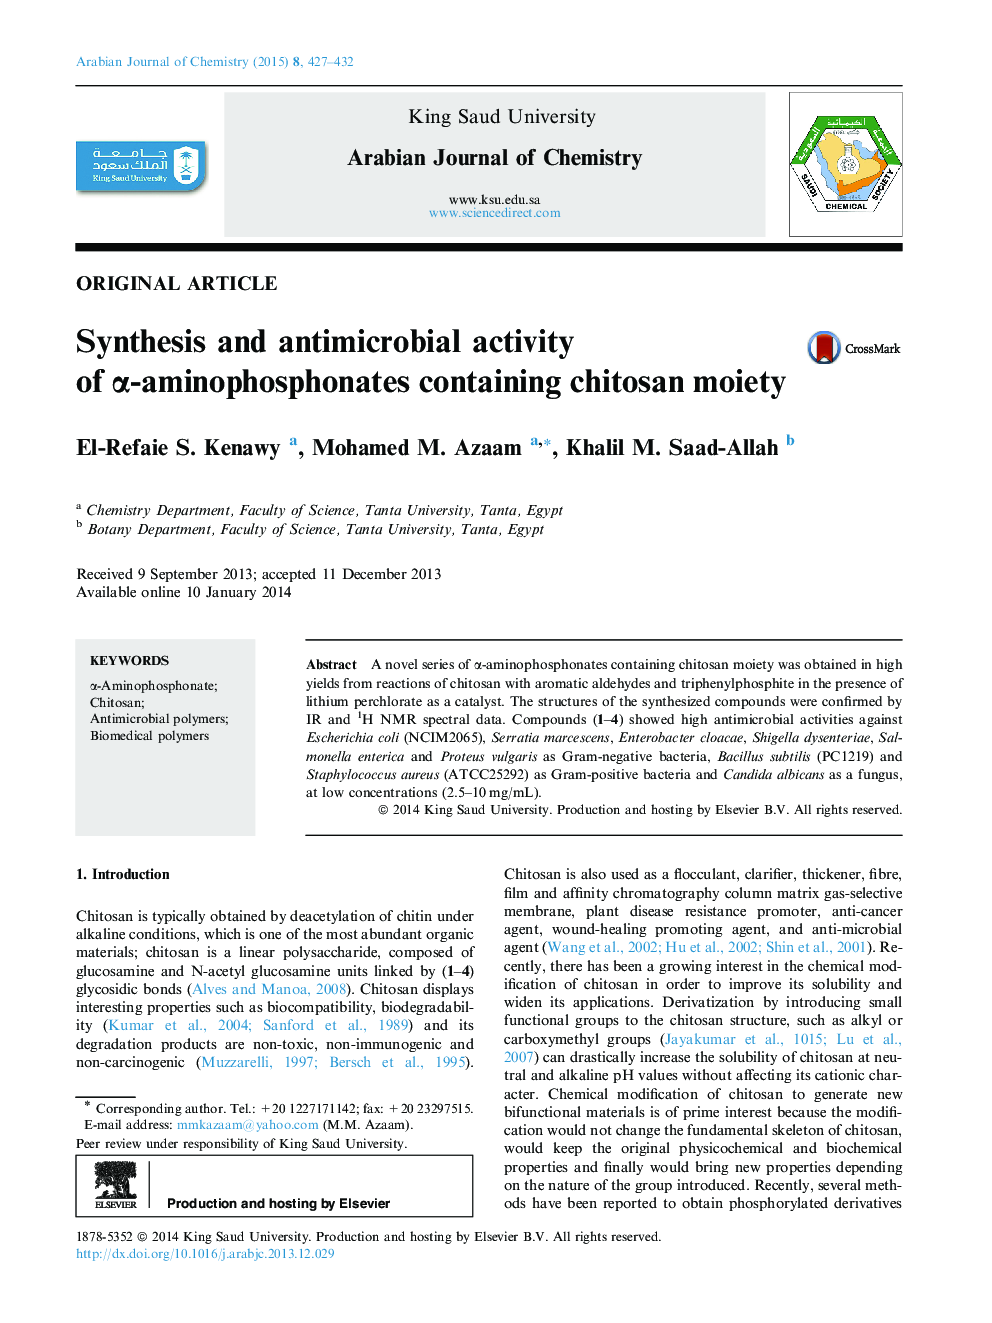 Synthesis and antimicrobial activity of α-aminophosphonates containing chitosan moiety 